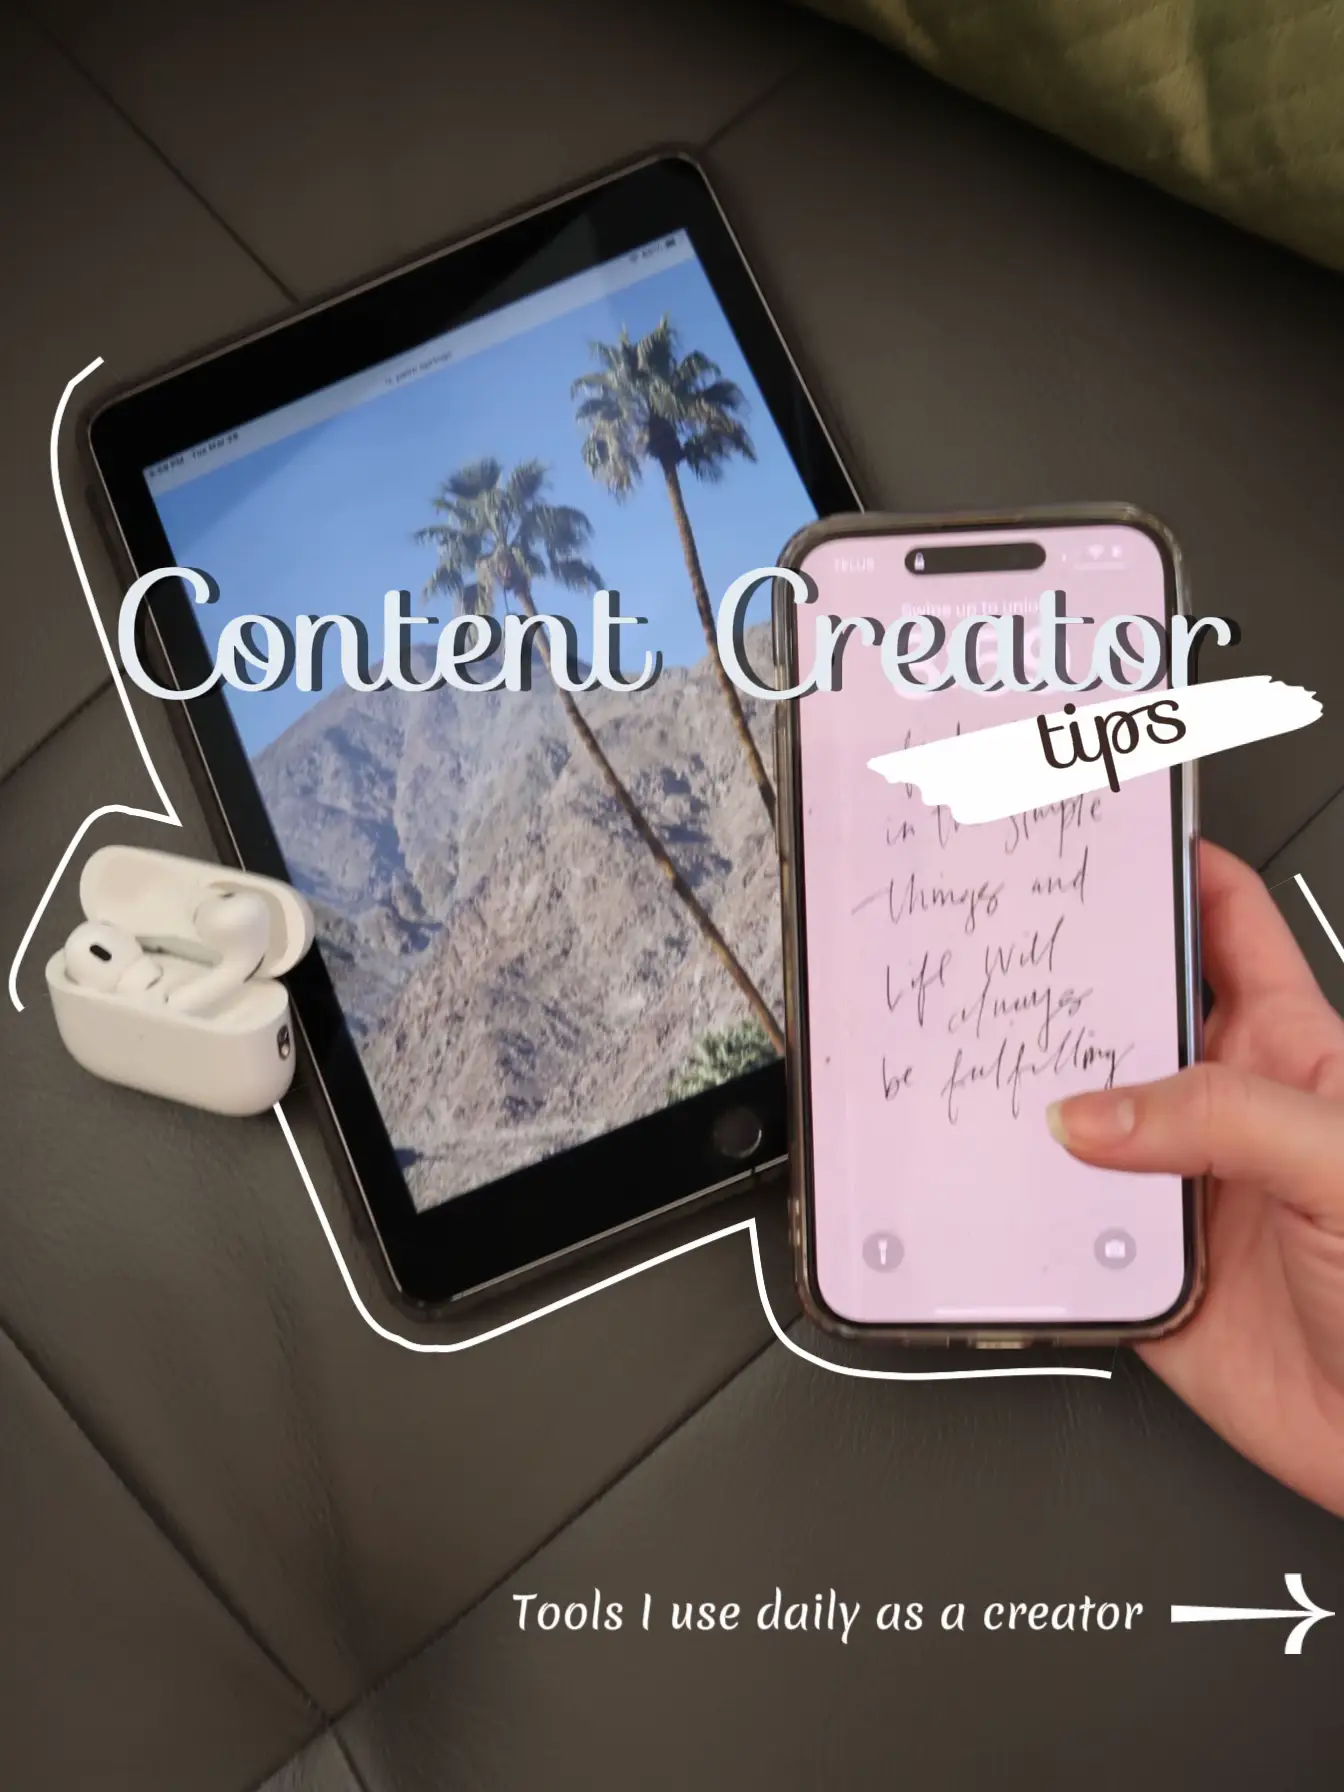  A hand holding a cell phone with a note that says "Content Creator tips: Tools I use daily as a creator".